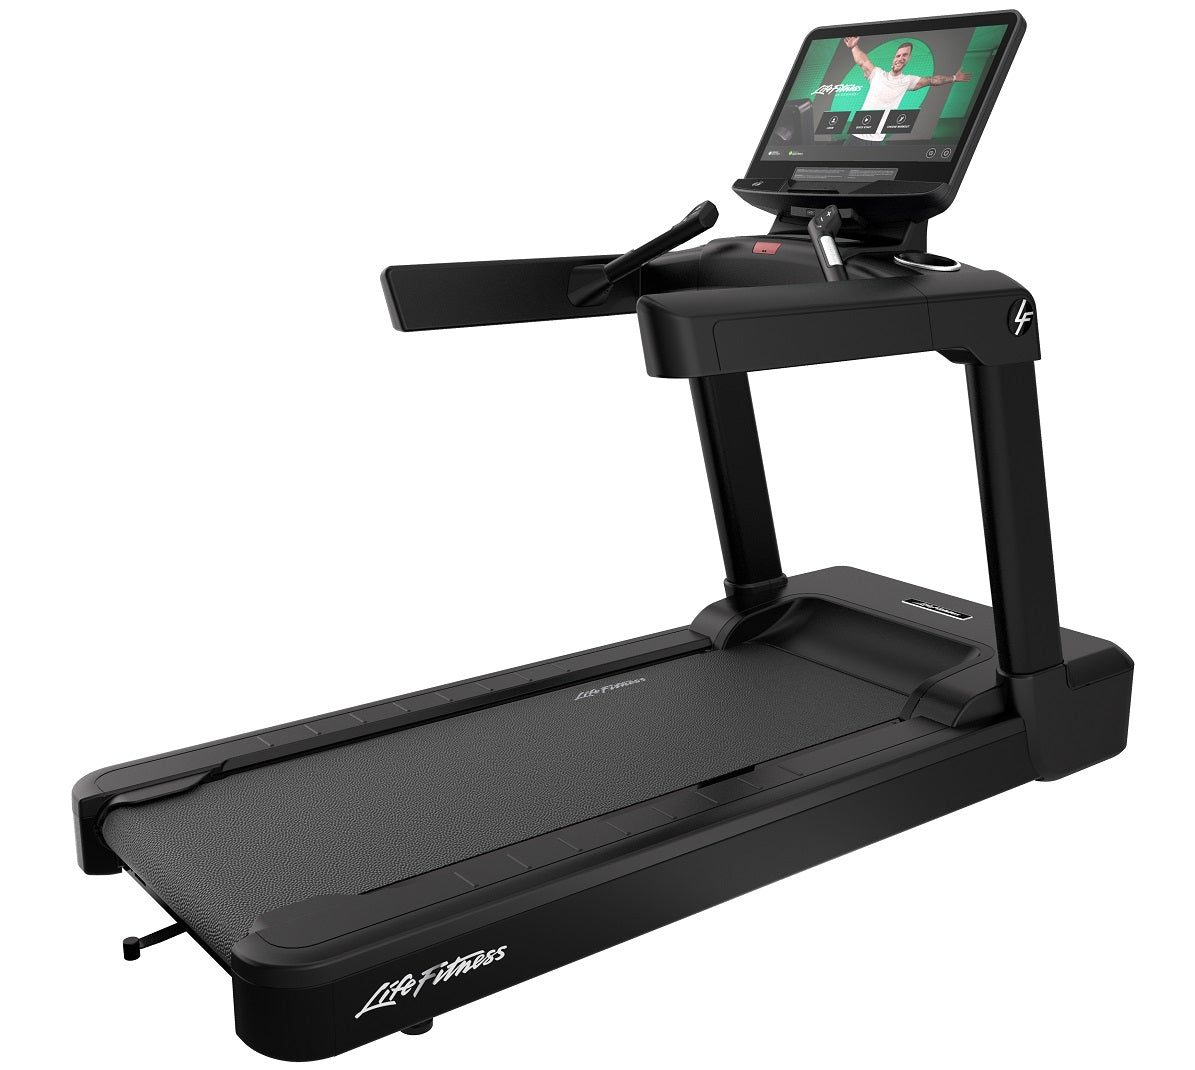 Introducing the Exciting Life Fitness SE4 HD Console on the Integrity + Range